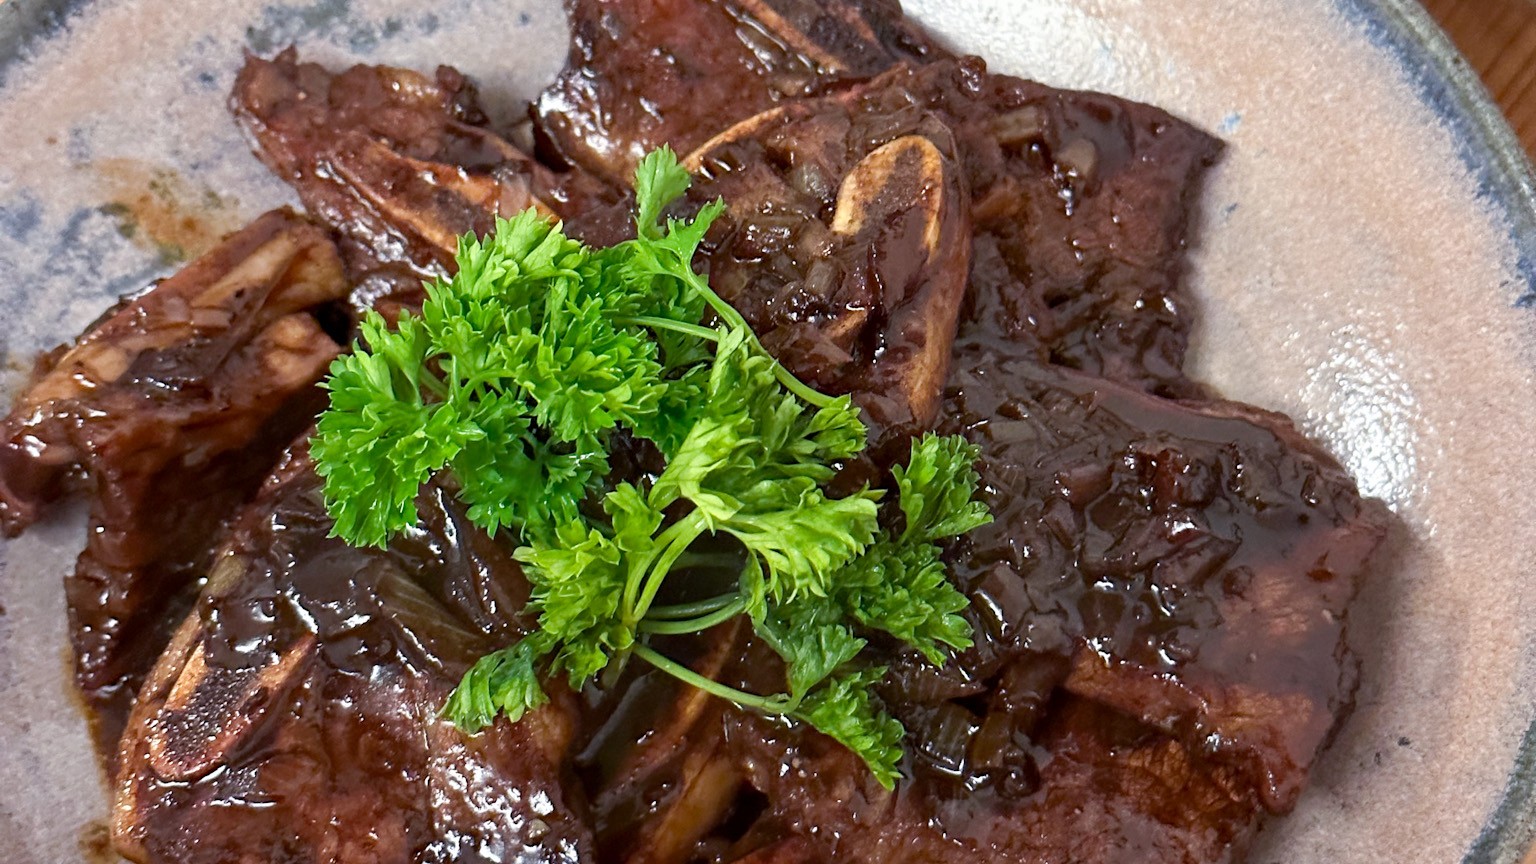 Image of Beef Short Ribs with black pepper sauce (黑椒牛仔骨)